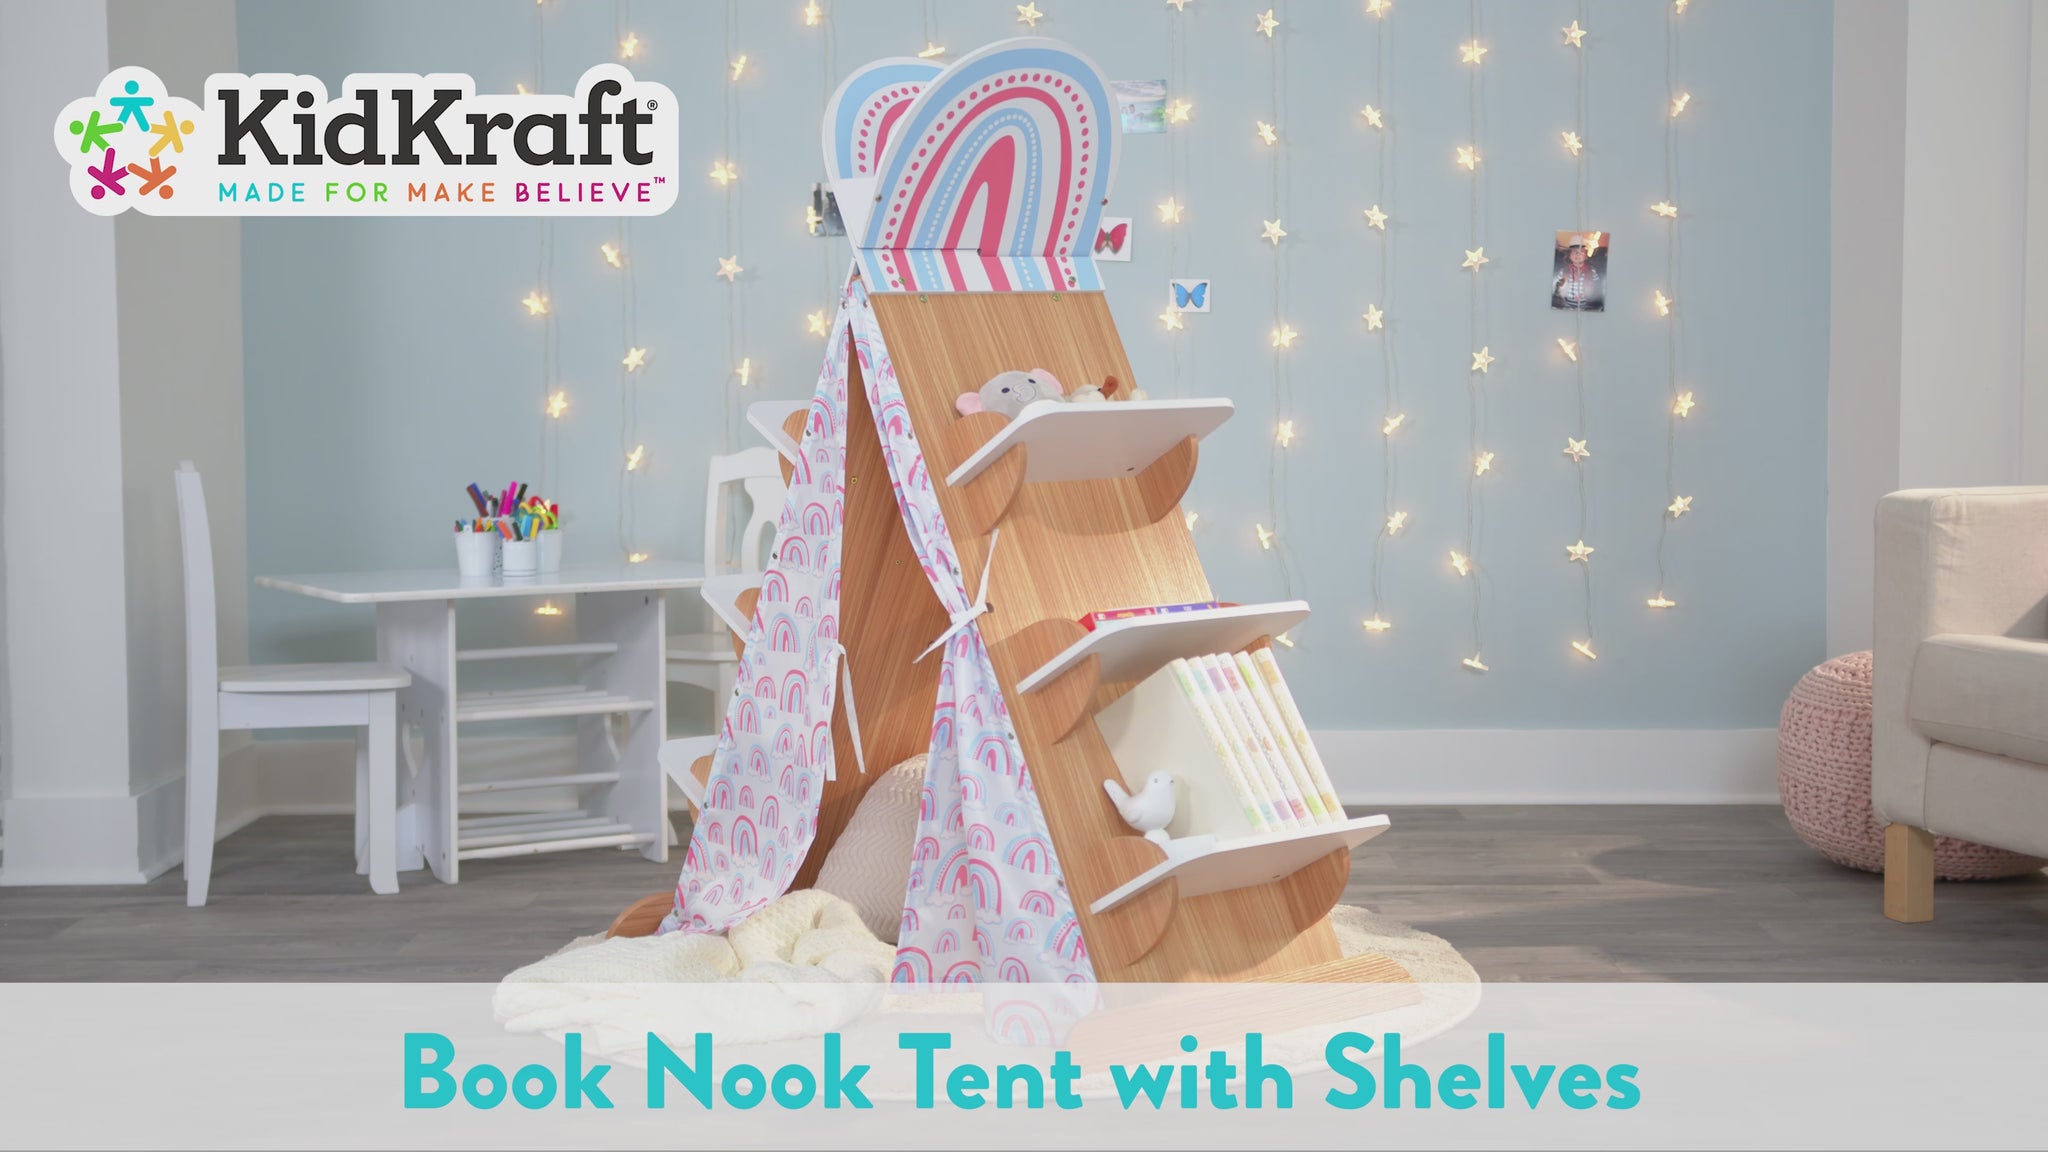 video of girl playing with KidKraft Book Nook Tent with Shelves